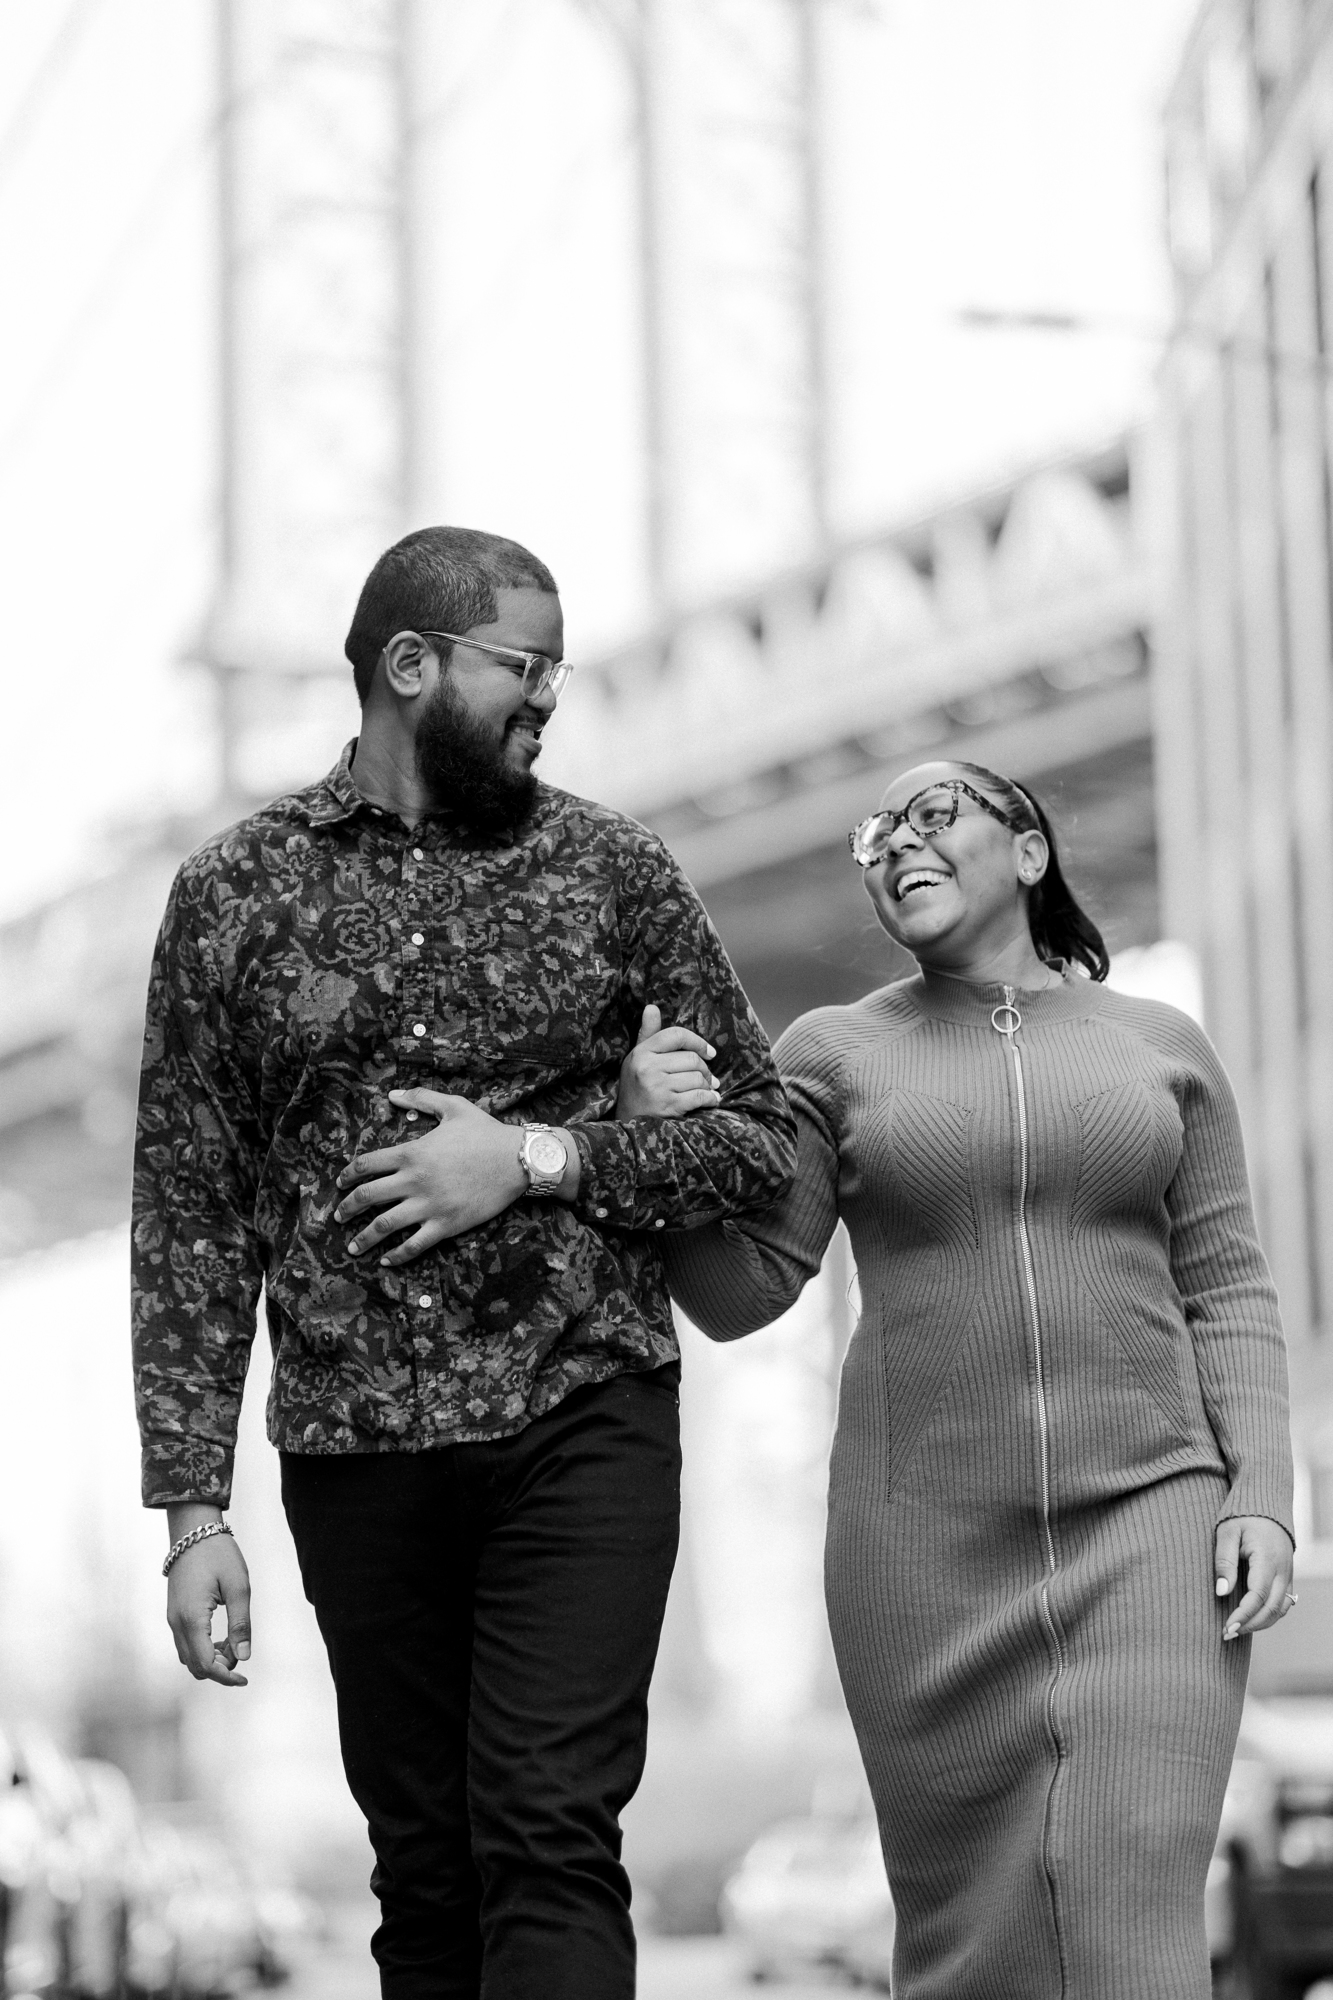 Magical Autumn DUMBO Engagement Photography at the Brooklyn Bridge